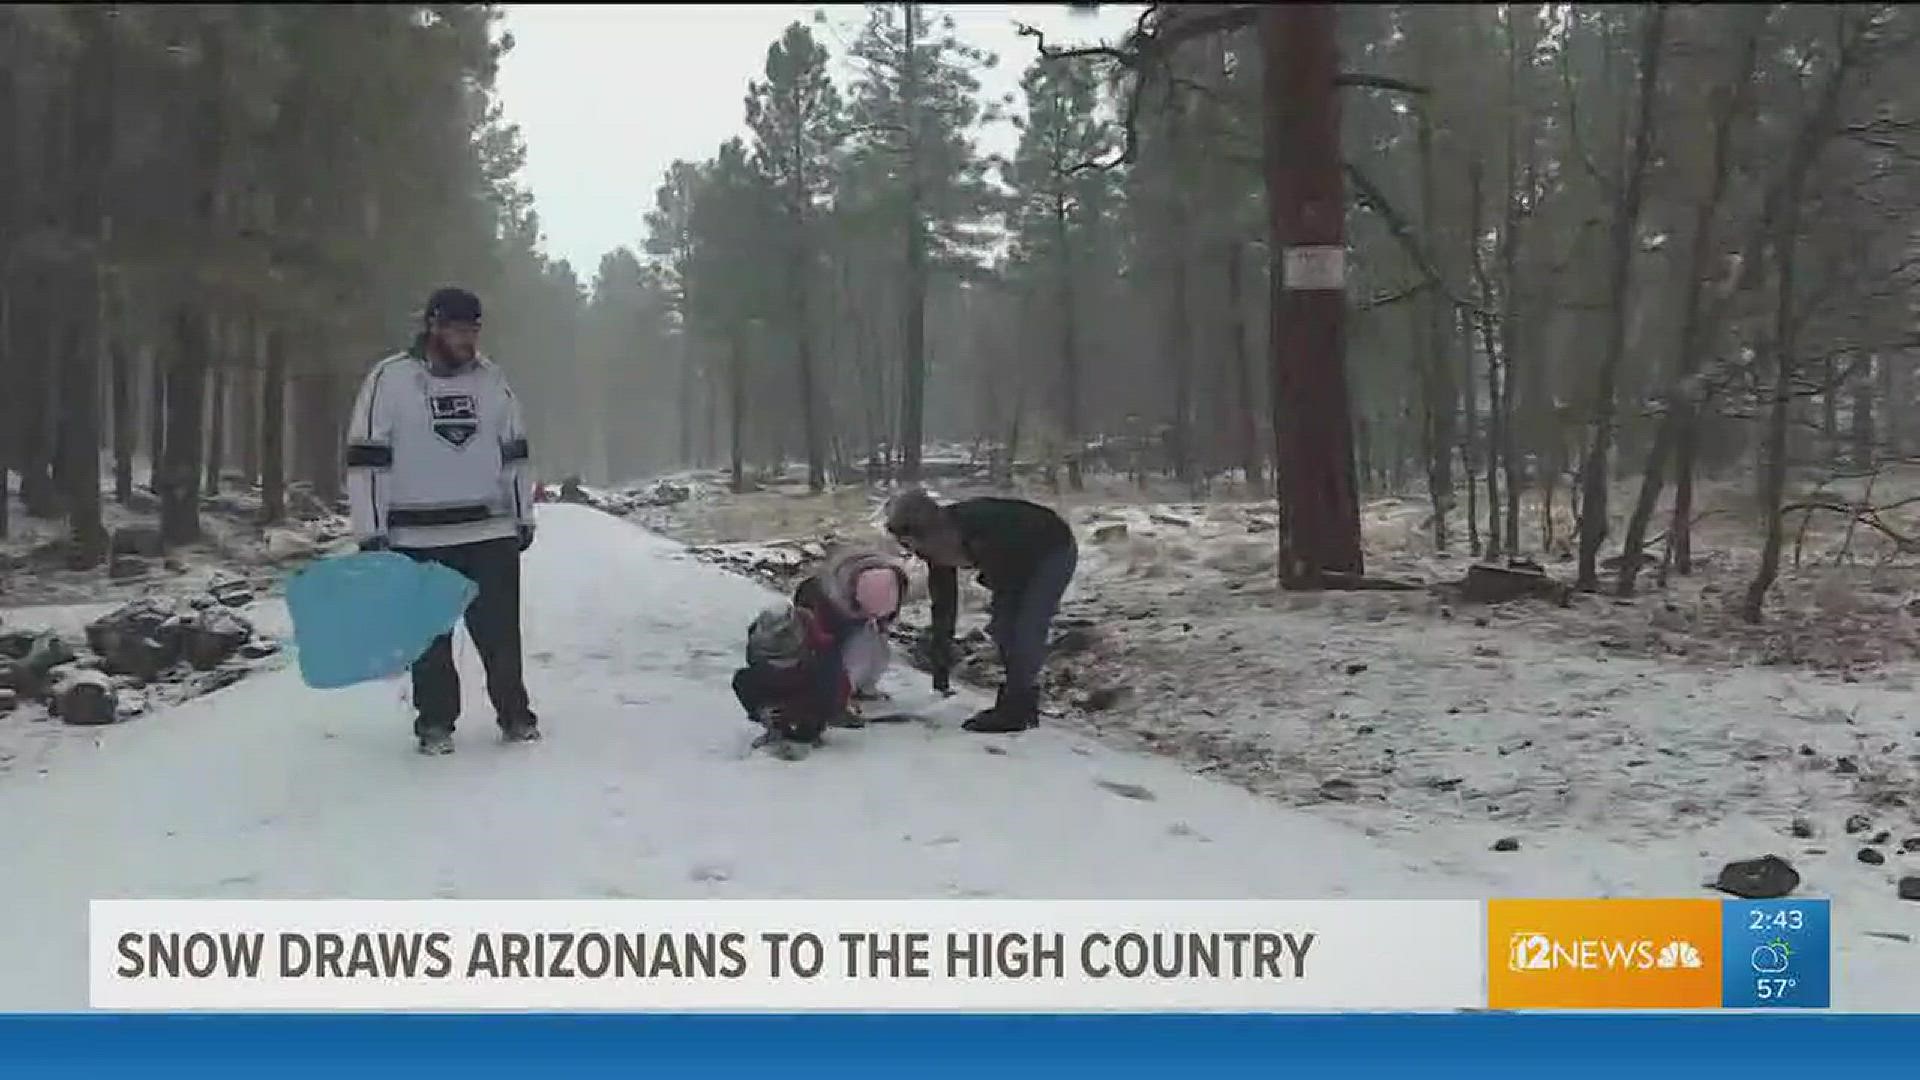 Snow in Flagstaff brought Phoenicians and others to the High Country to play in the white stuff.